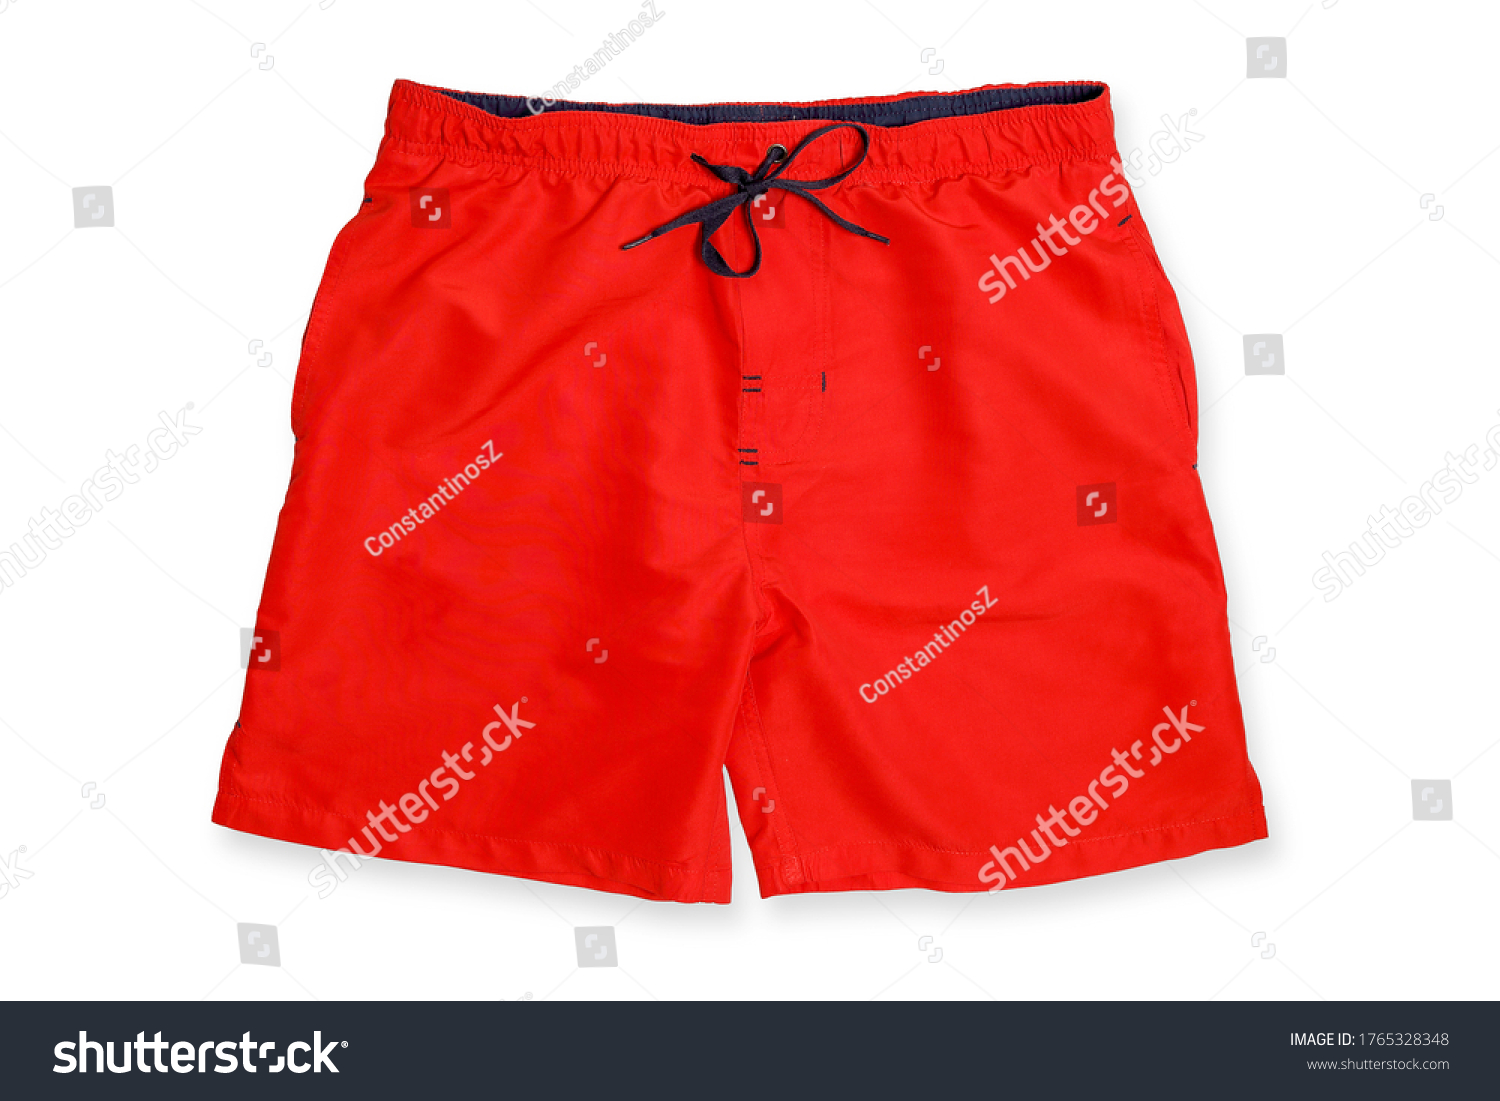 red swimming trunks isolated on white #1765328348